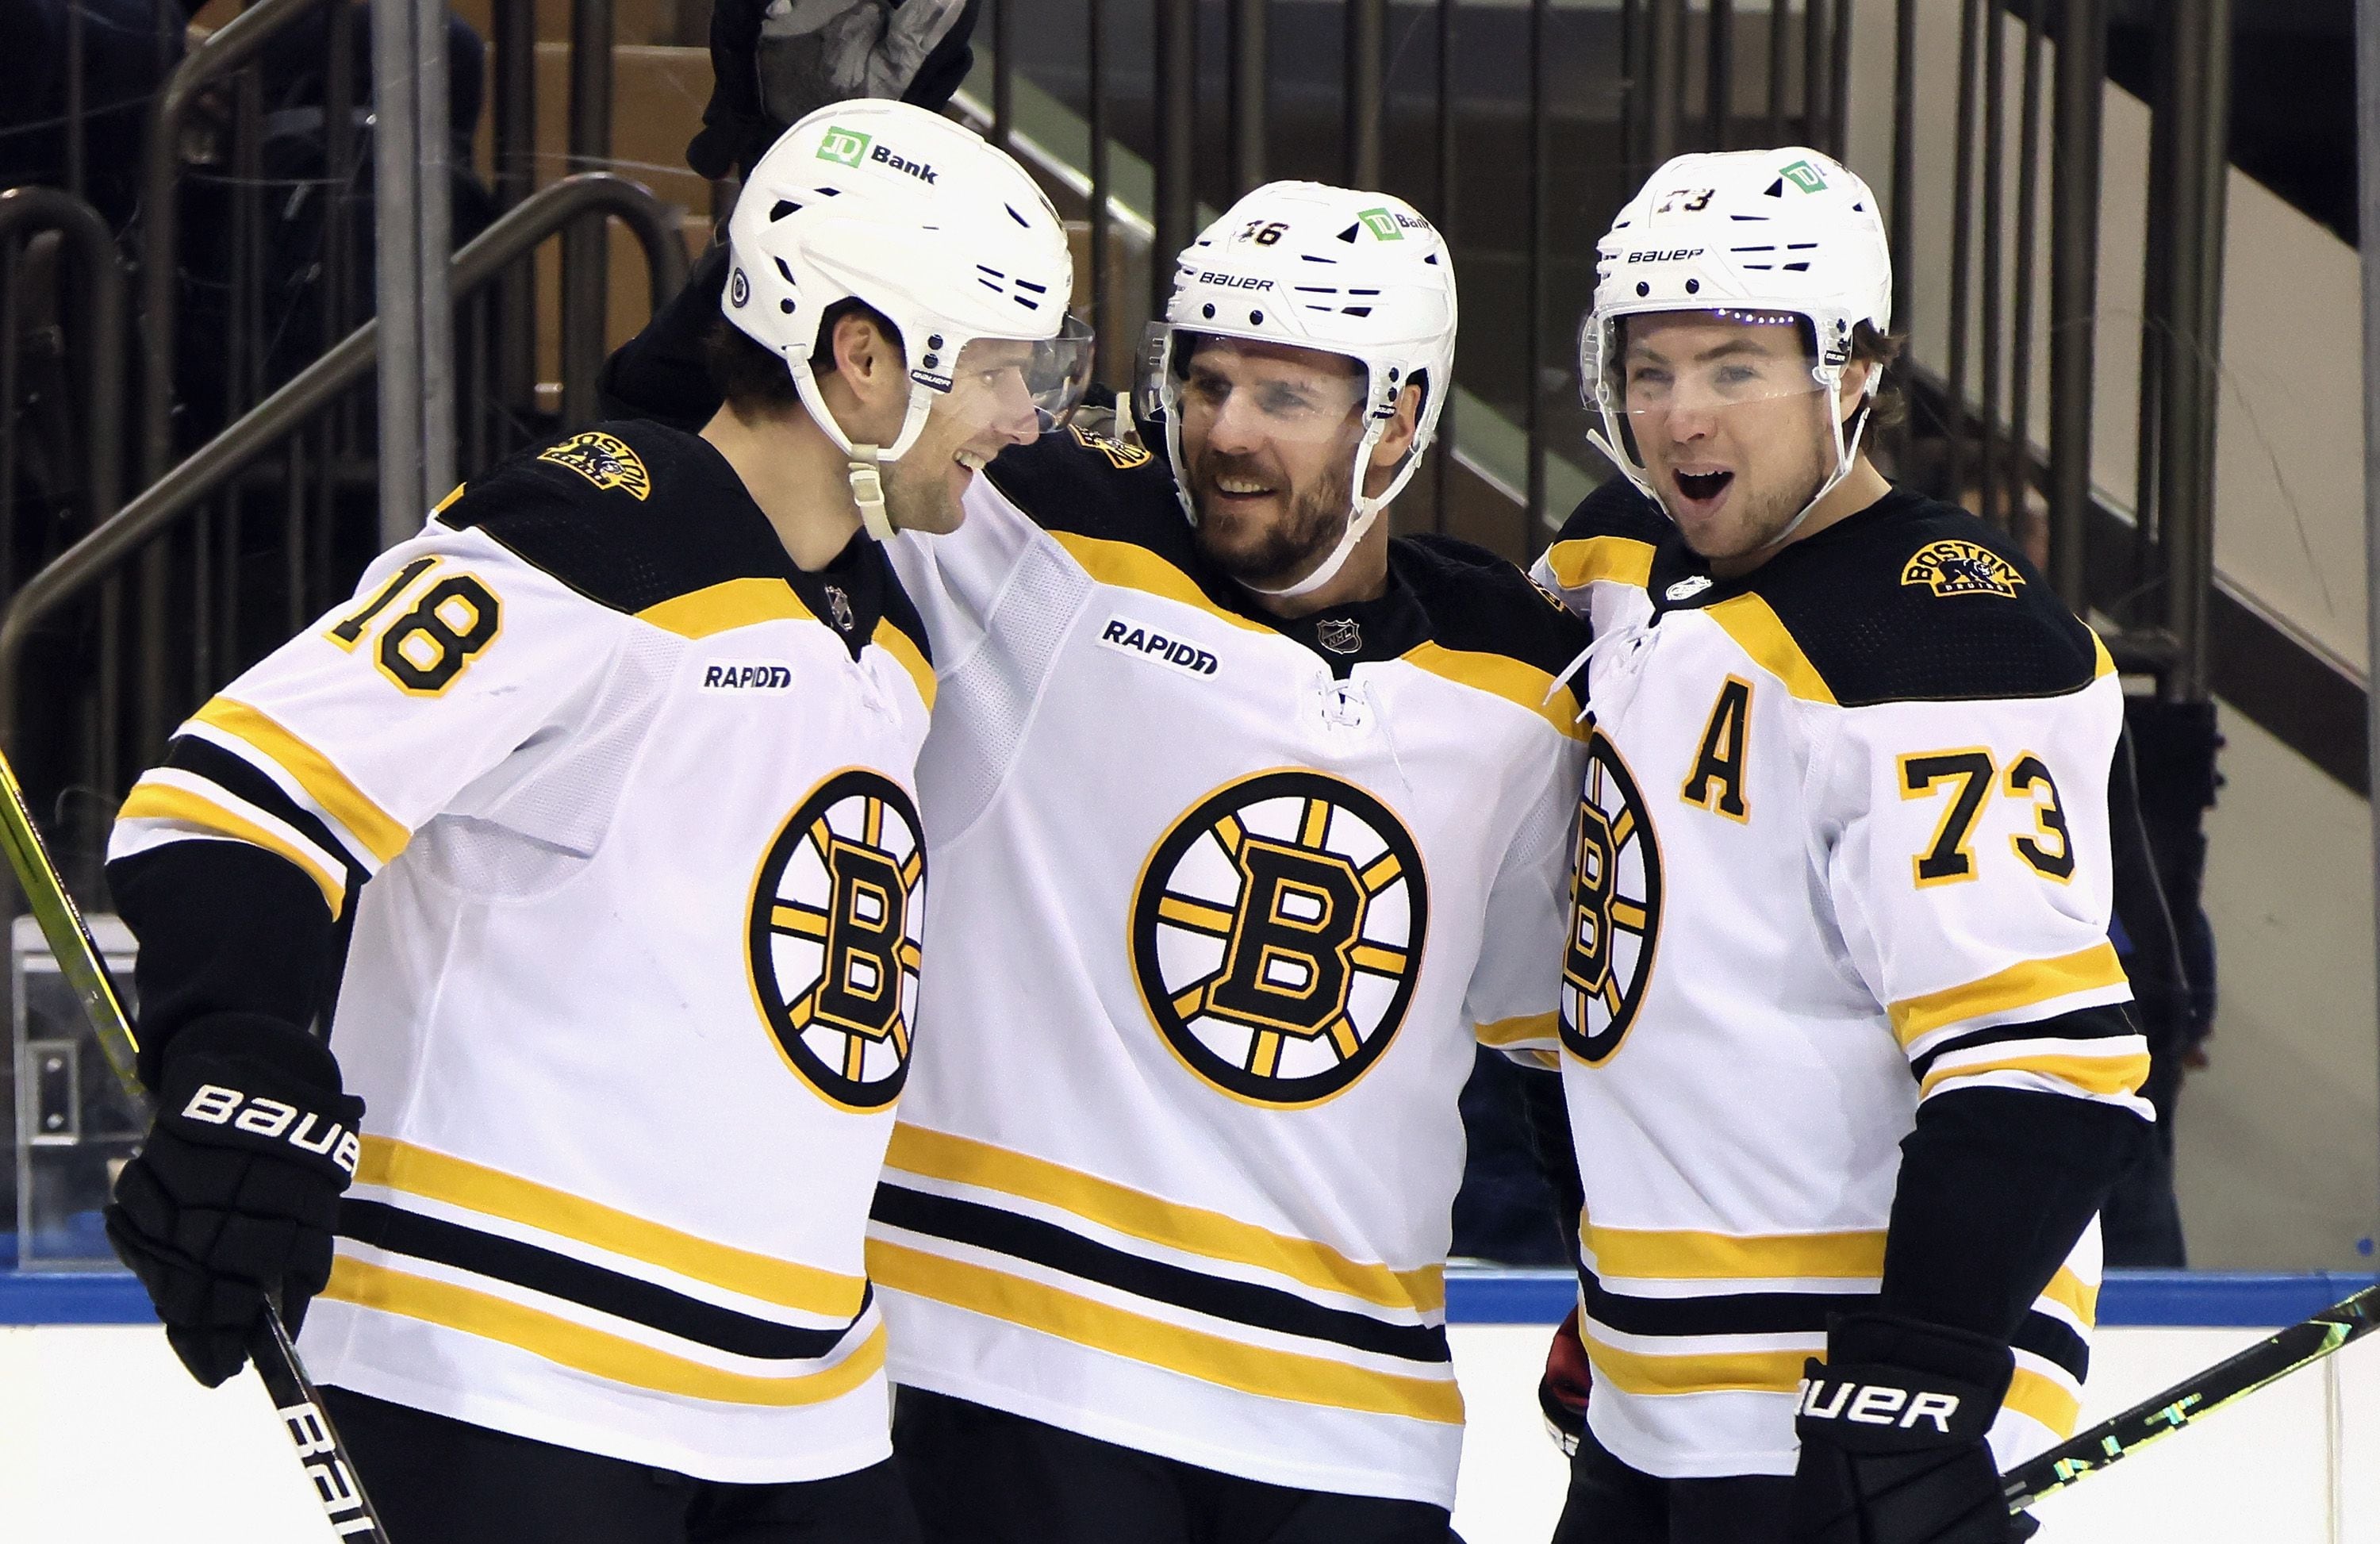 NHL playoffs 2022: Hurricanes vs. Bruins Game 6 odds, prediction today